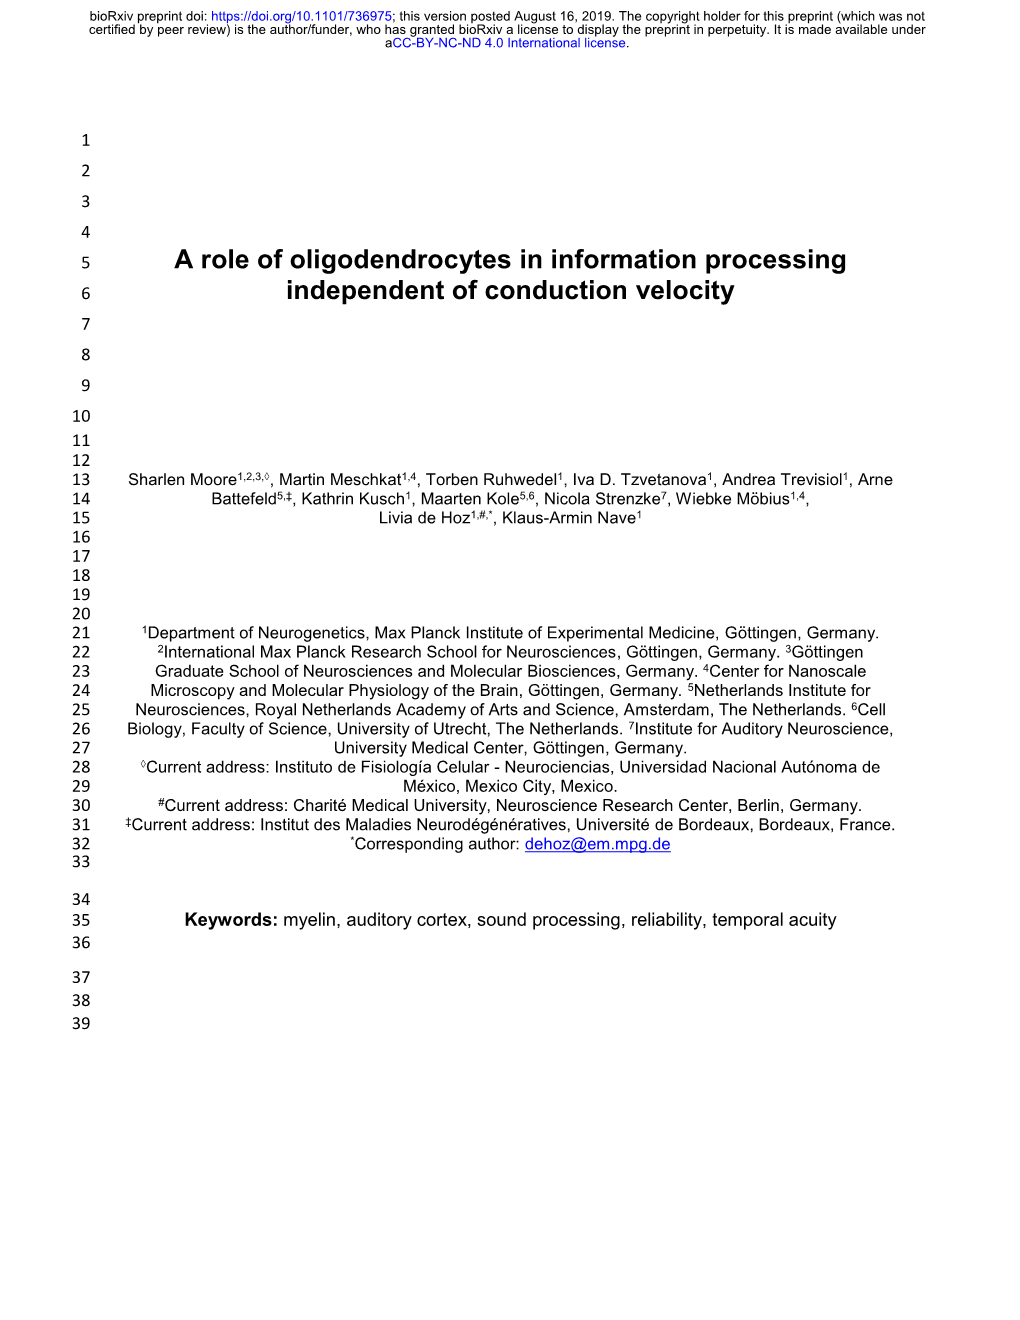 A Role of Oligodendrocytes in Information Processing